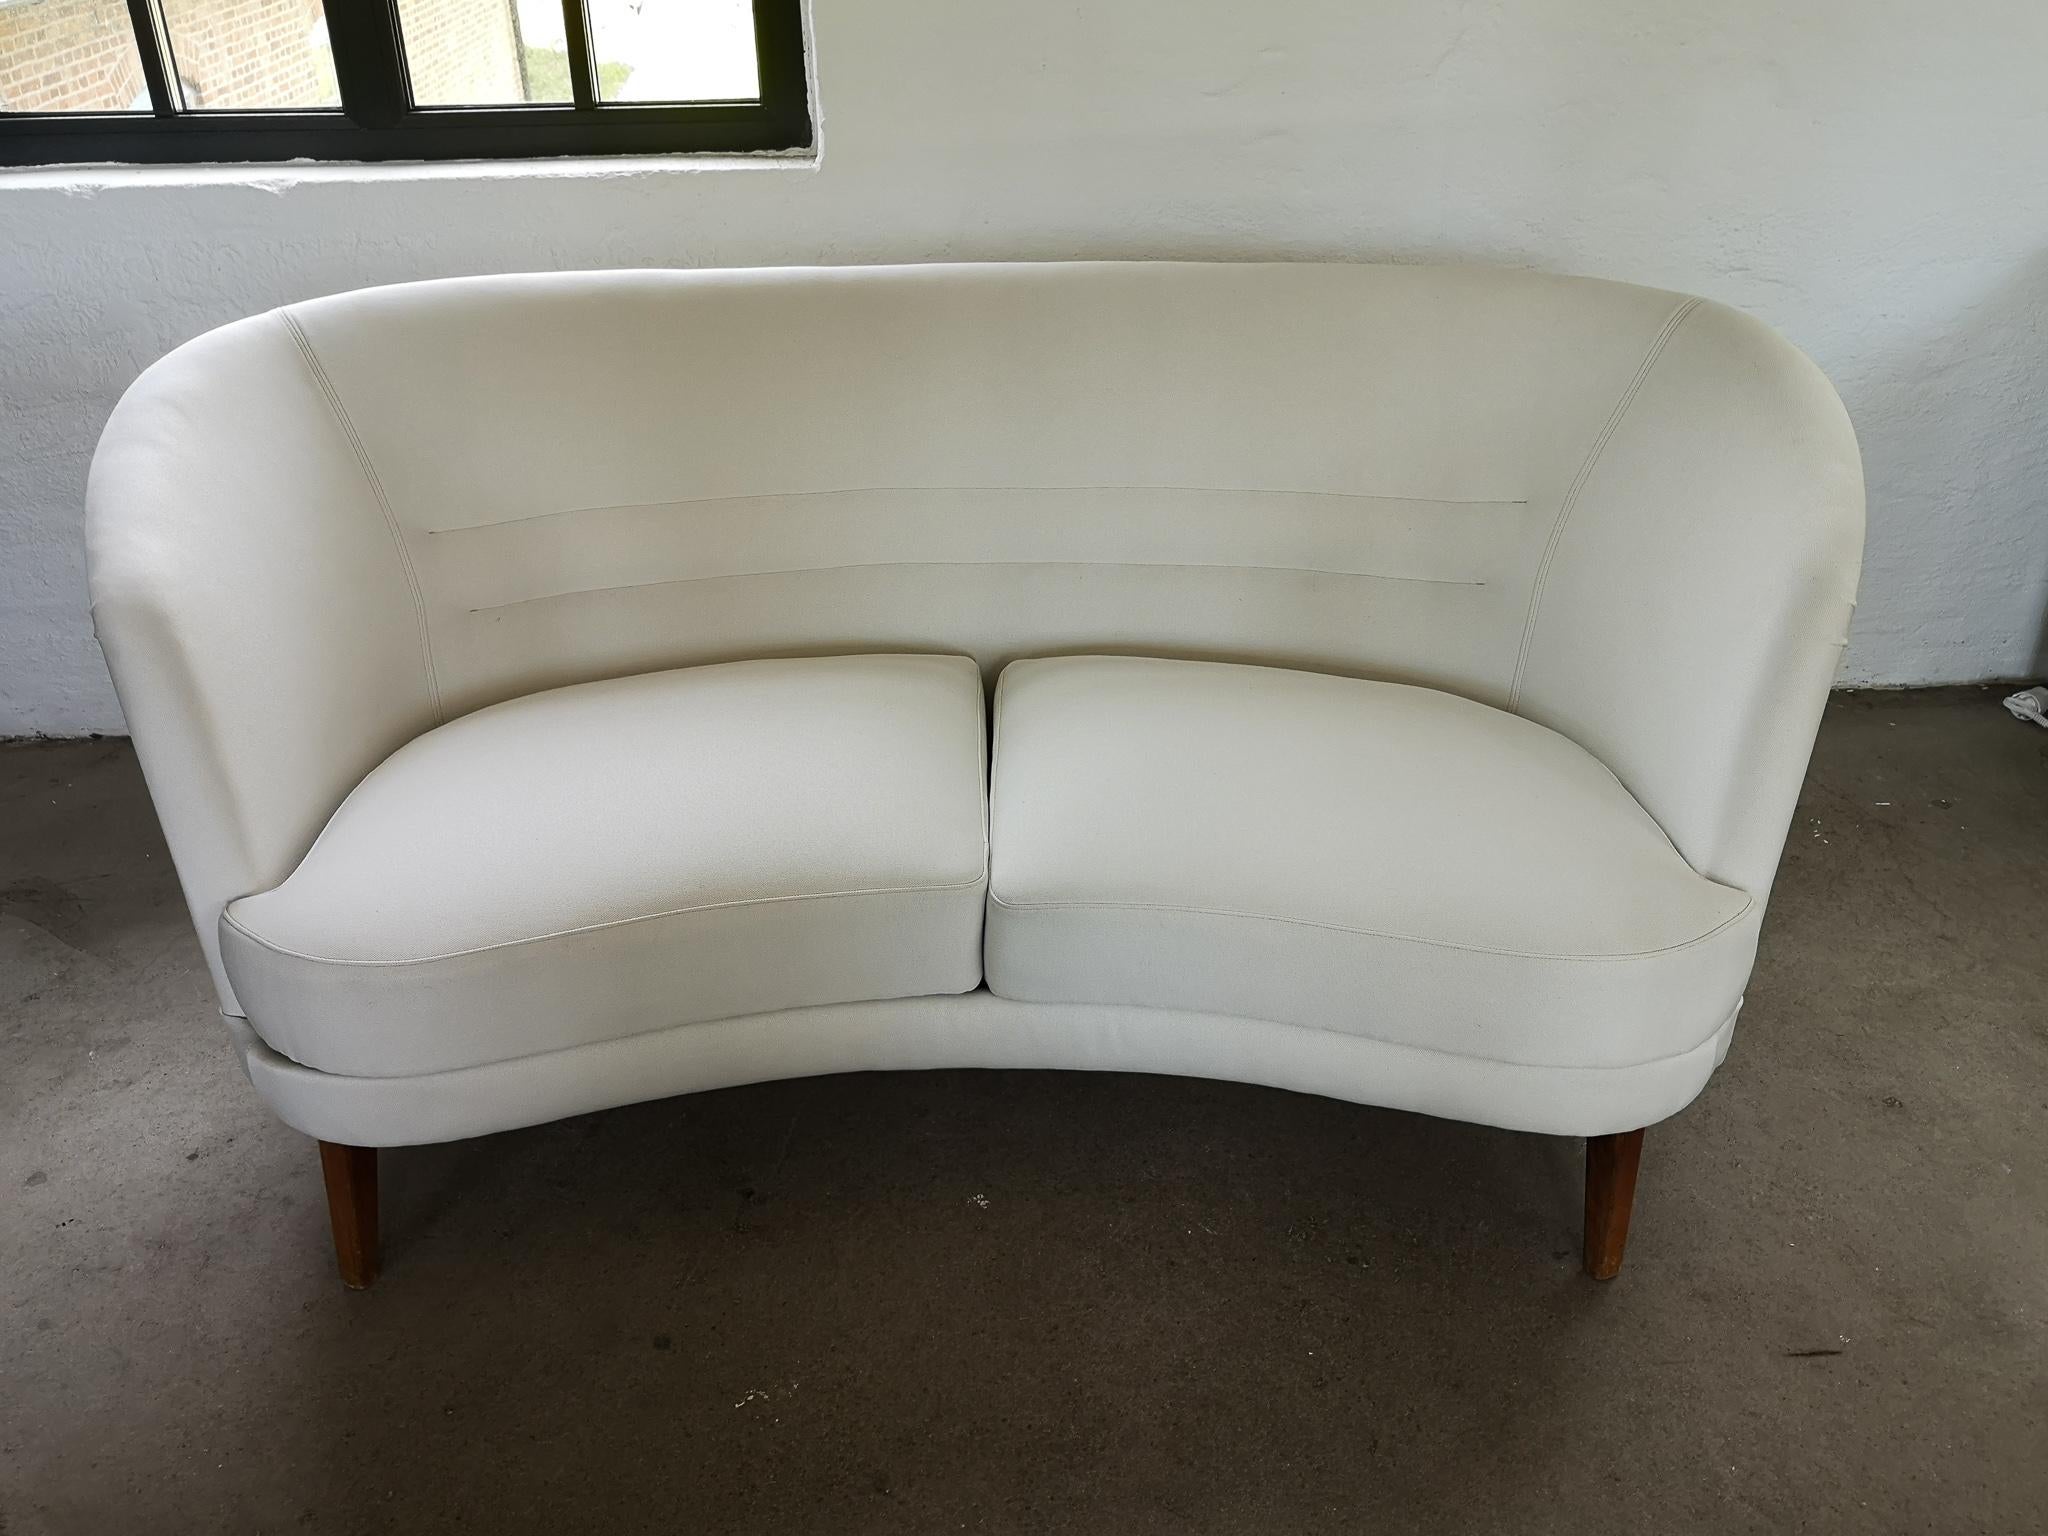 Mid-Century Modern Midcentury Curved Sofa and Chair OPE Sweden, 1950s